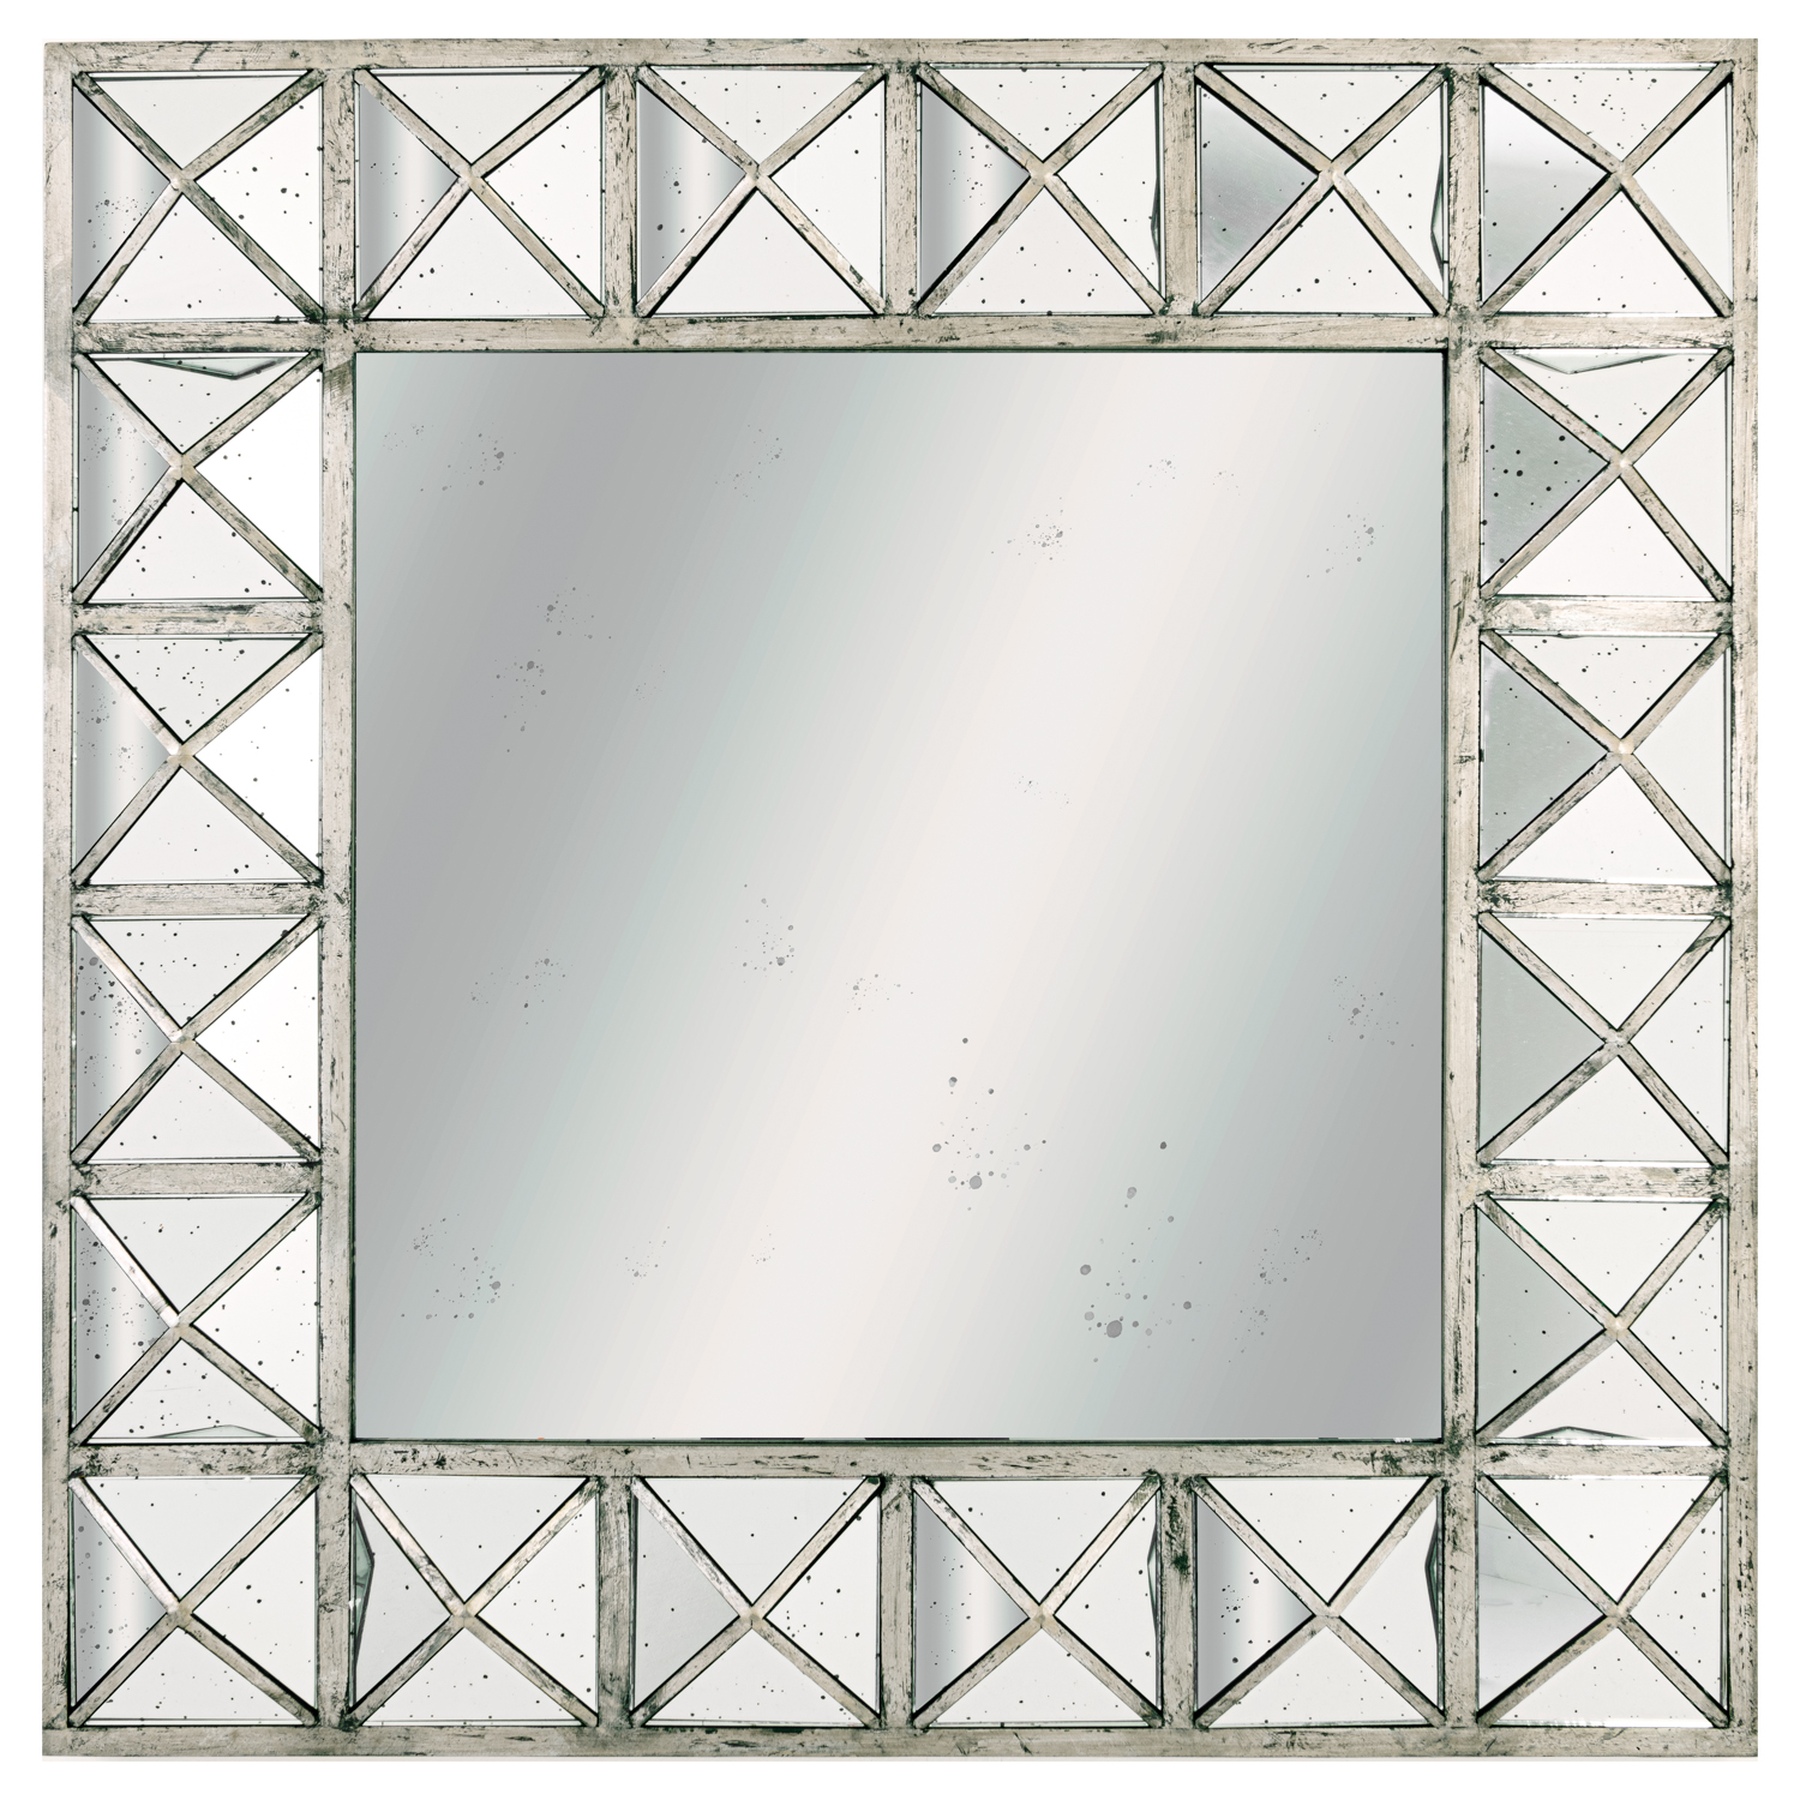 Augustus Detailed Triangulated Wall Mirror - Image 1